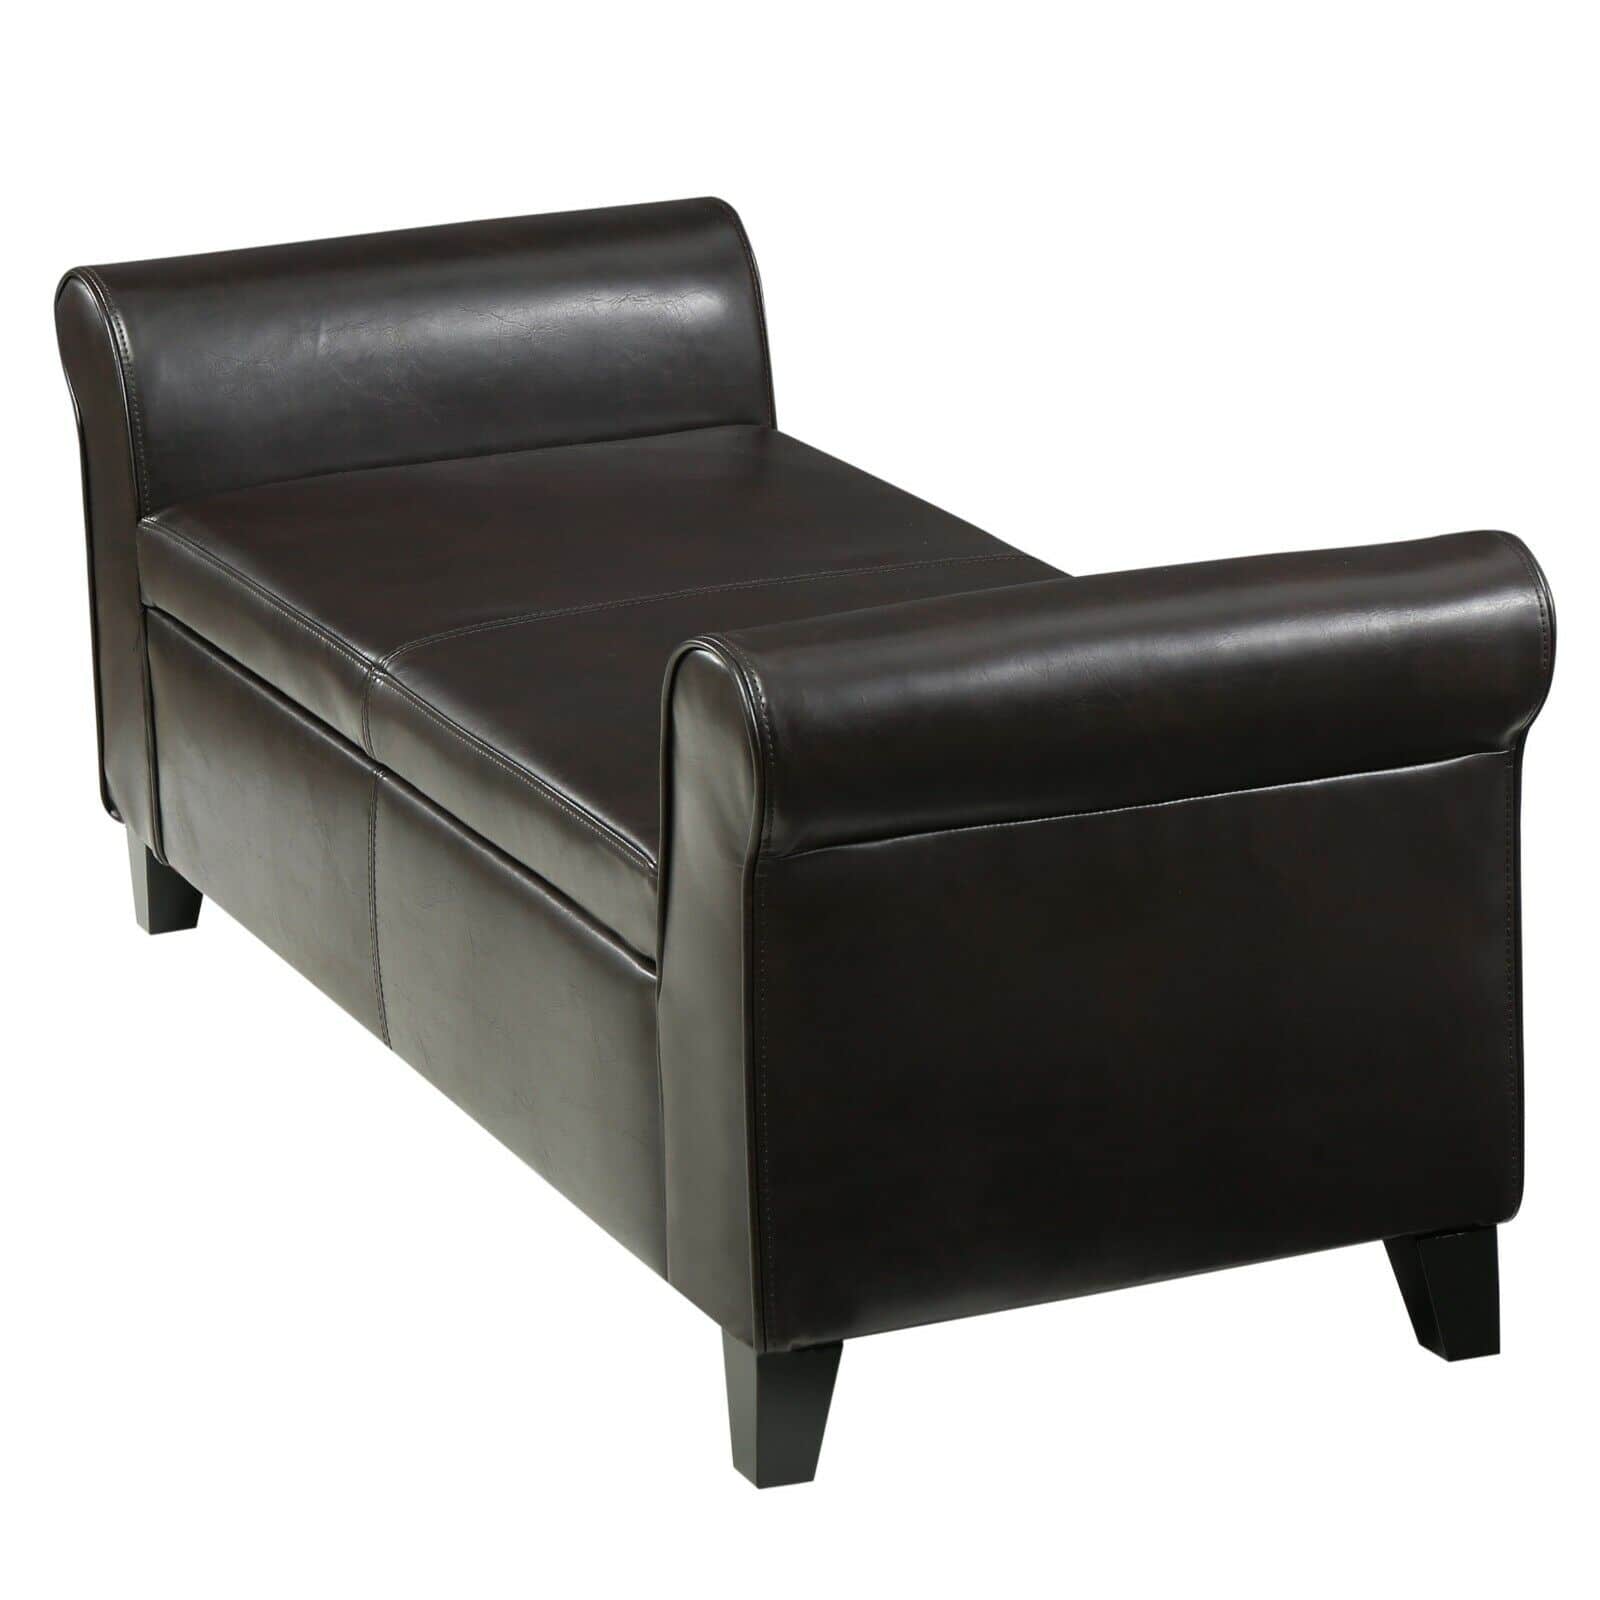 An image of a black leather storage bench.